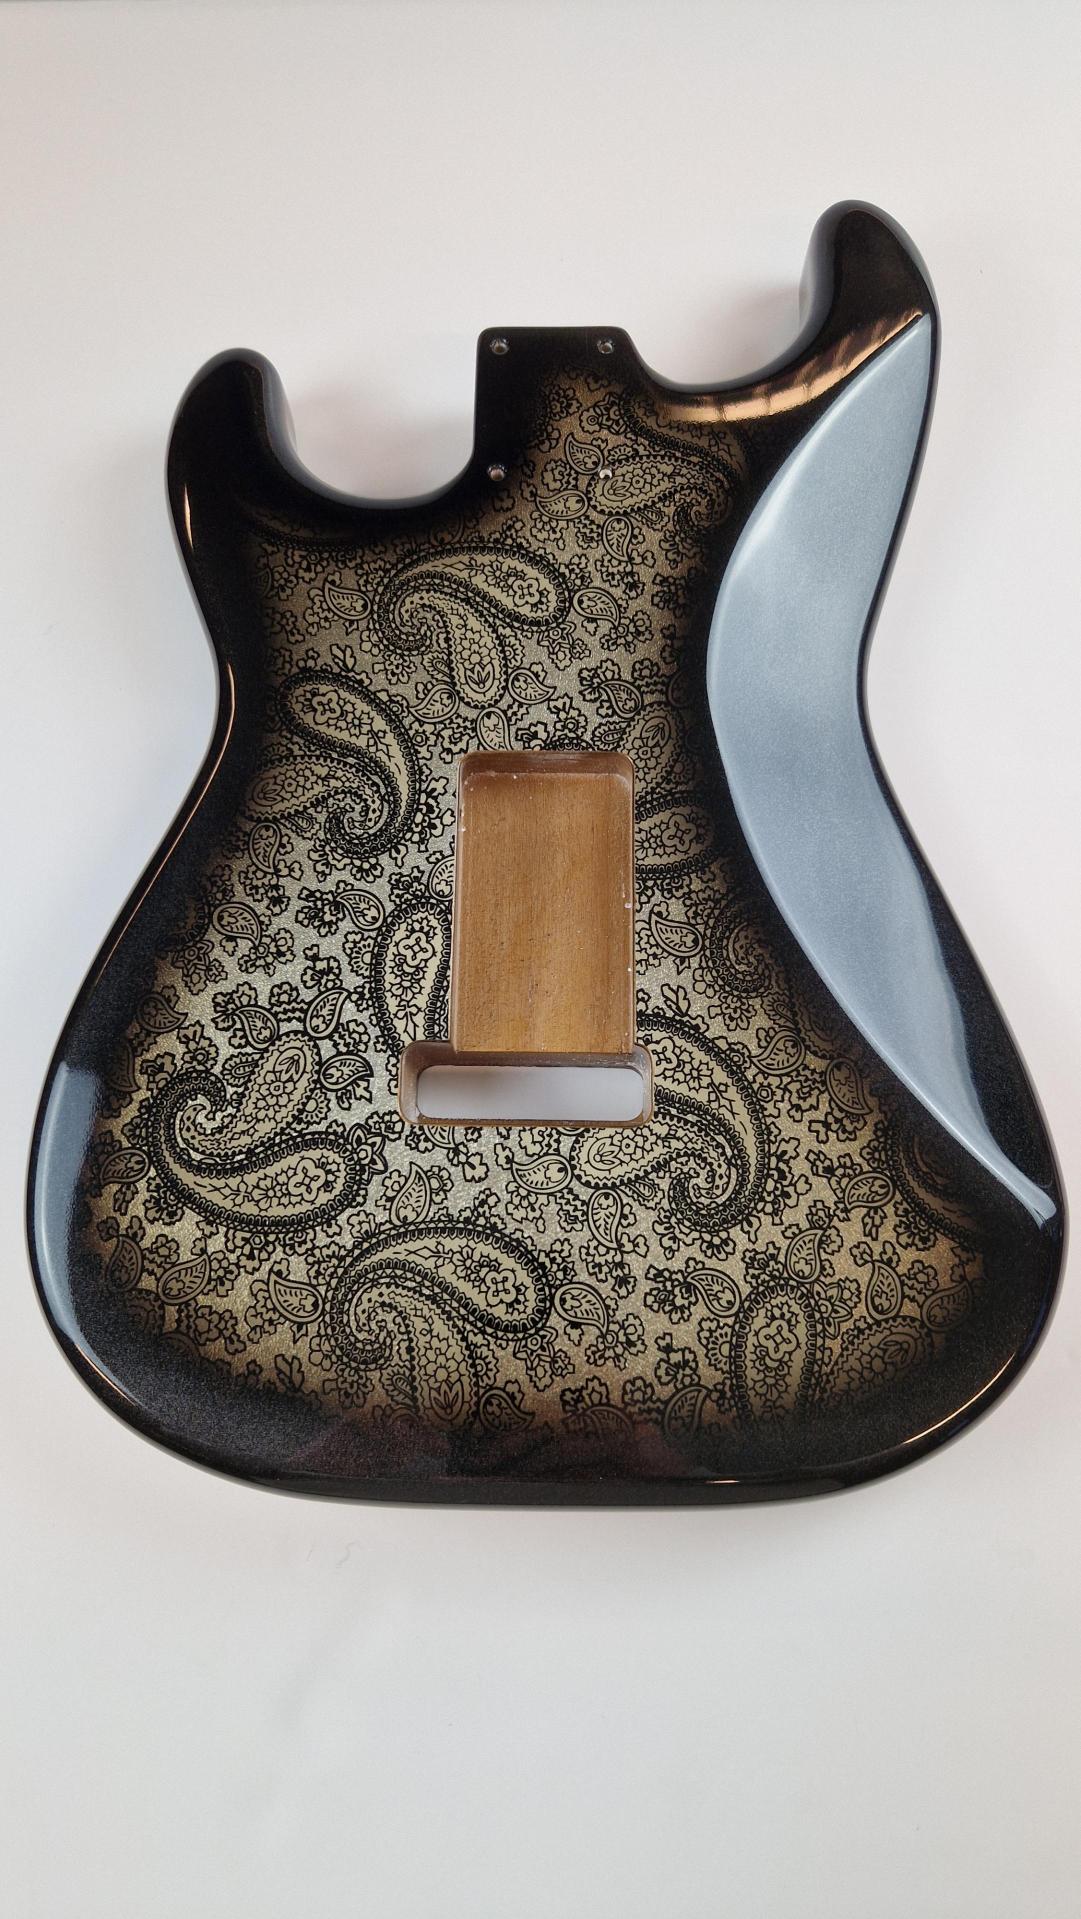 Strat Replacement Body with Polyurethane Finish - Black Paisley